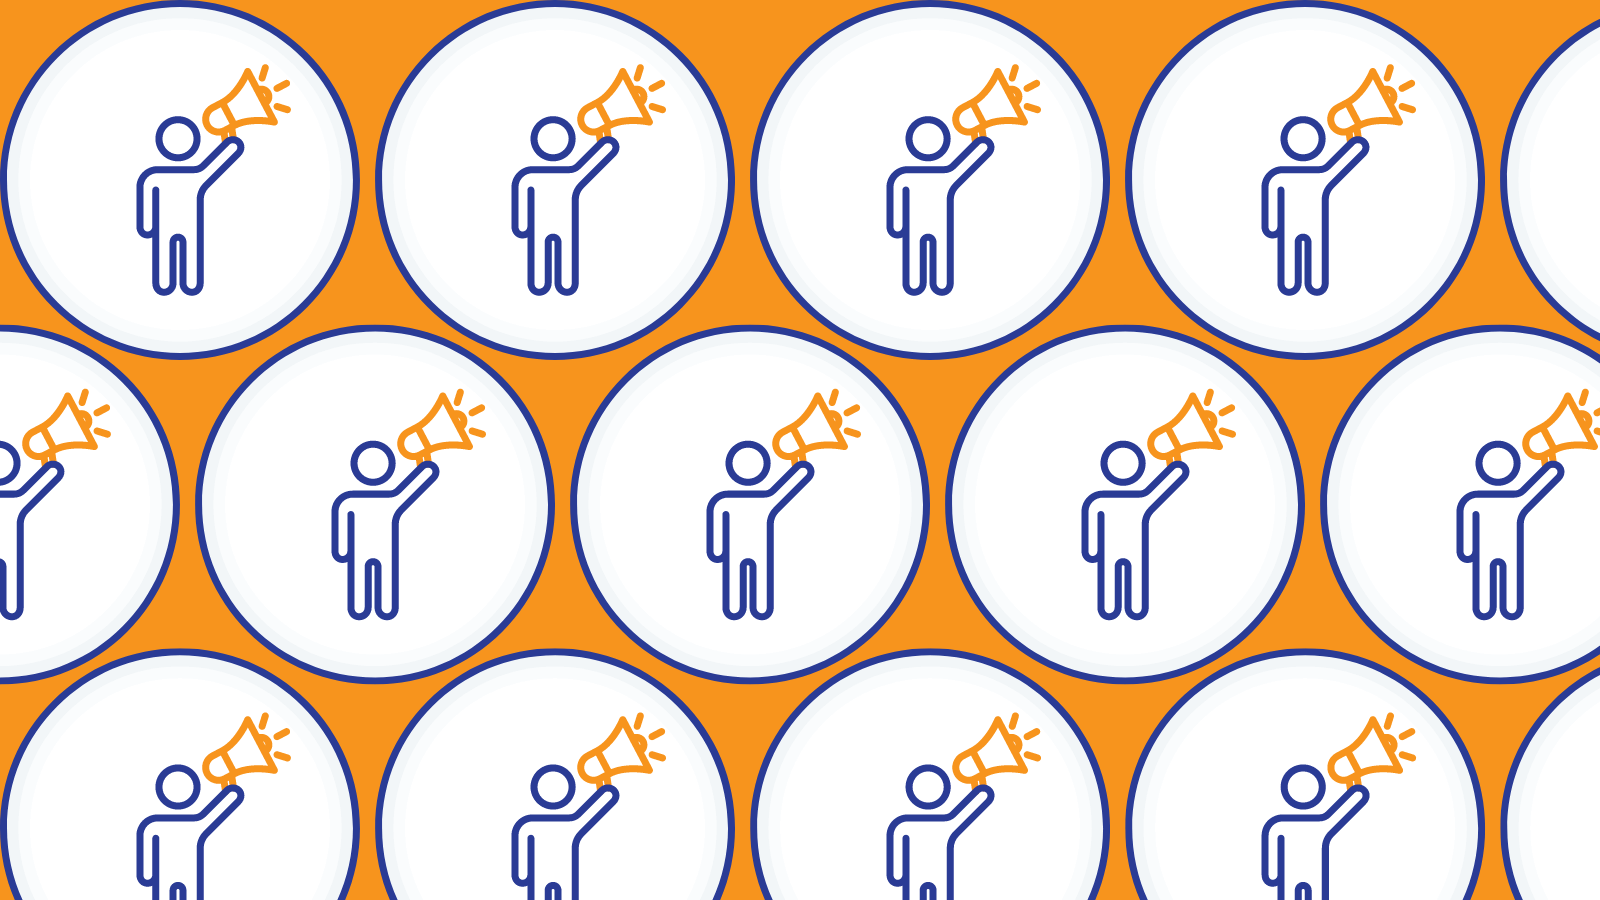 Several circular icons of a person holding a megaphone